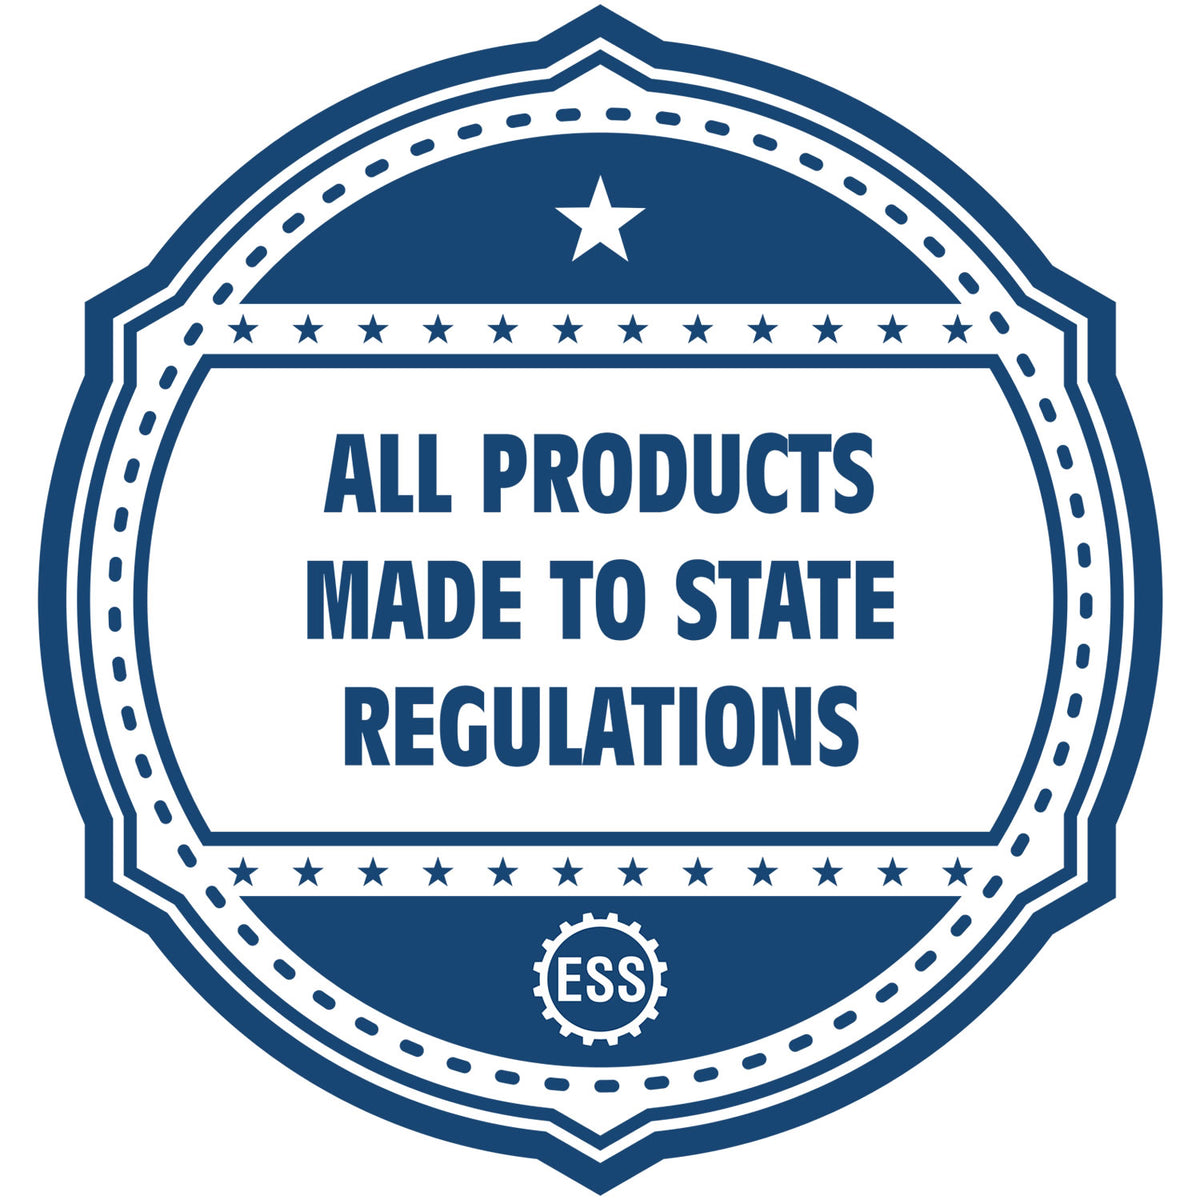 An icon or badge element for the Self-Inking Montana PE Stamp showing that this product is made in compliance with state regulations.